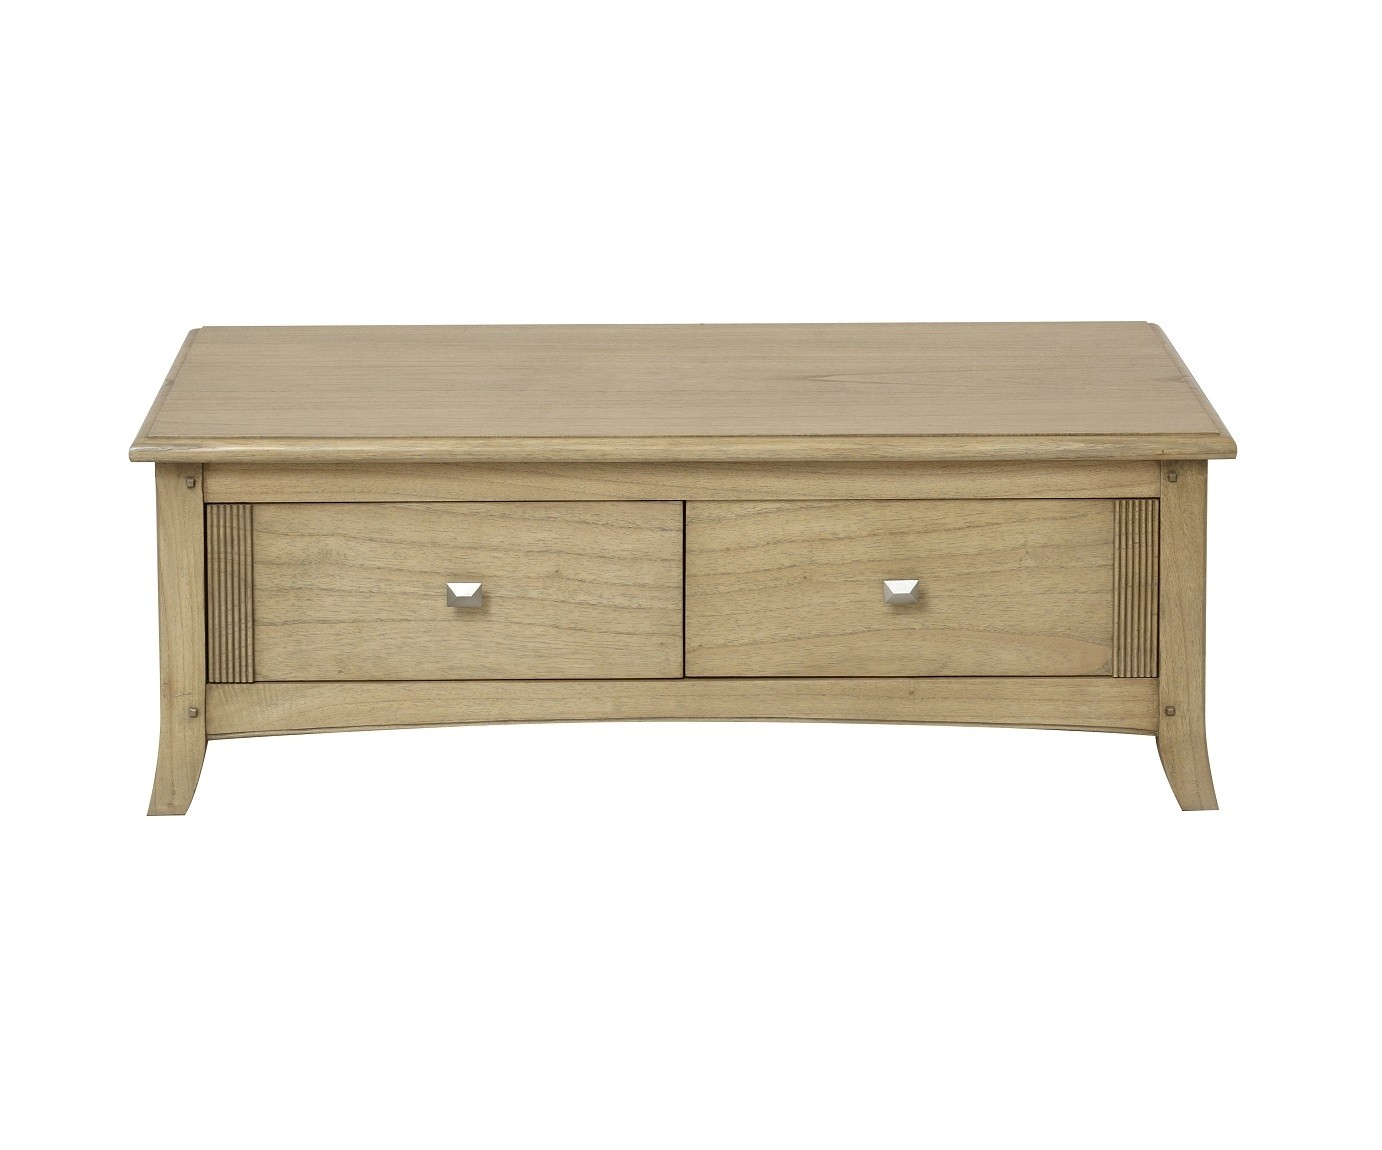 Lincoln Ash Large Coffee Table With Drawers Oak Furniture Uk throughout proportions 1382 X 1150